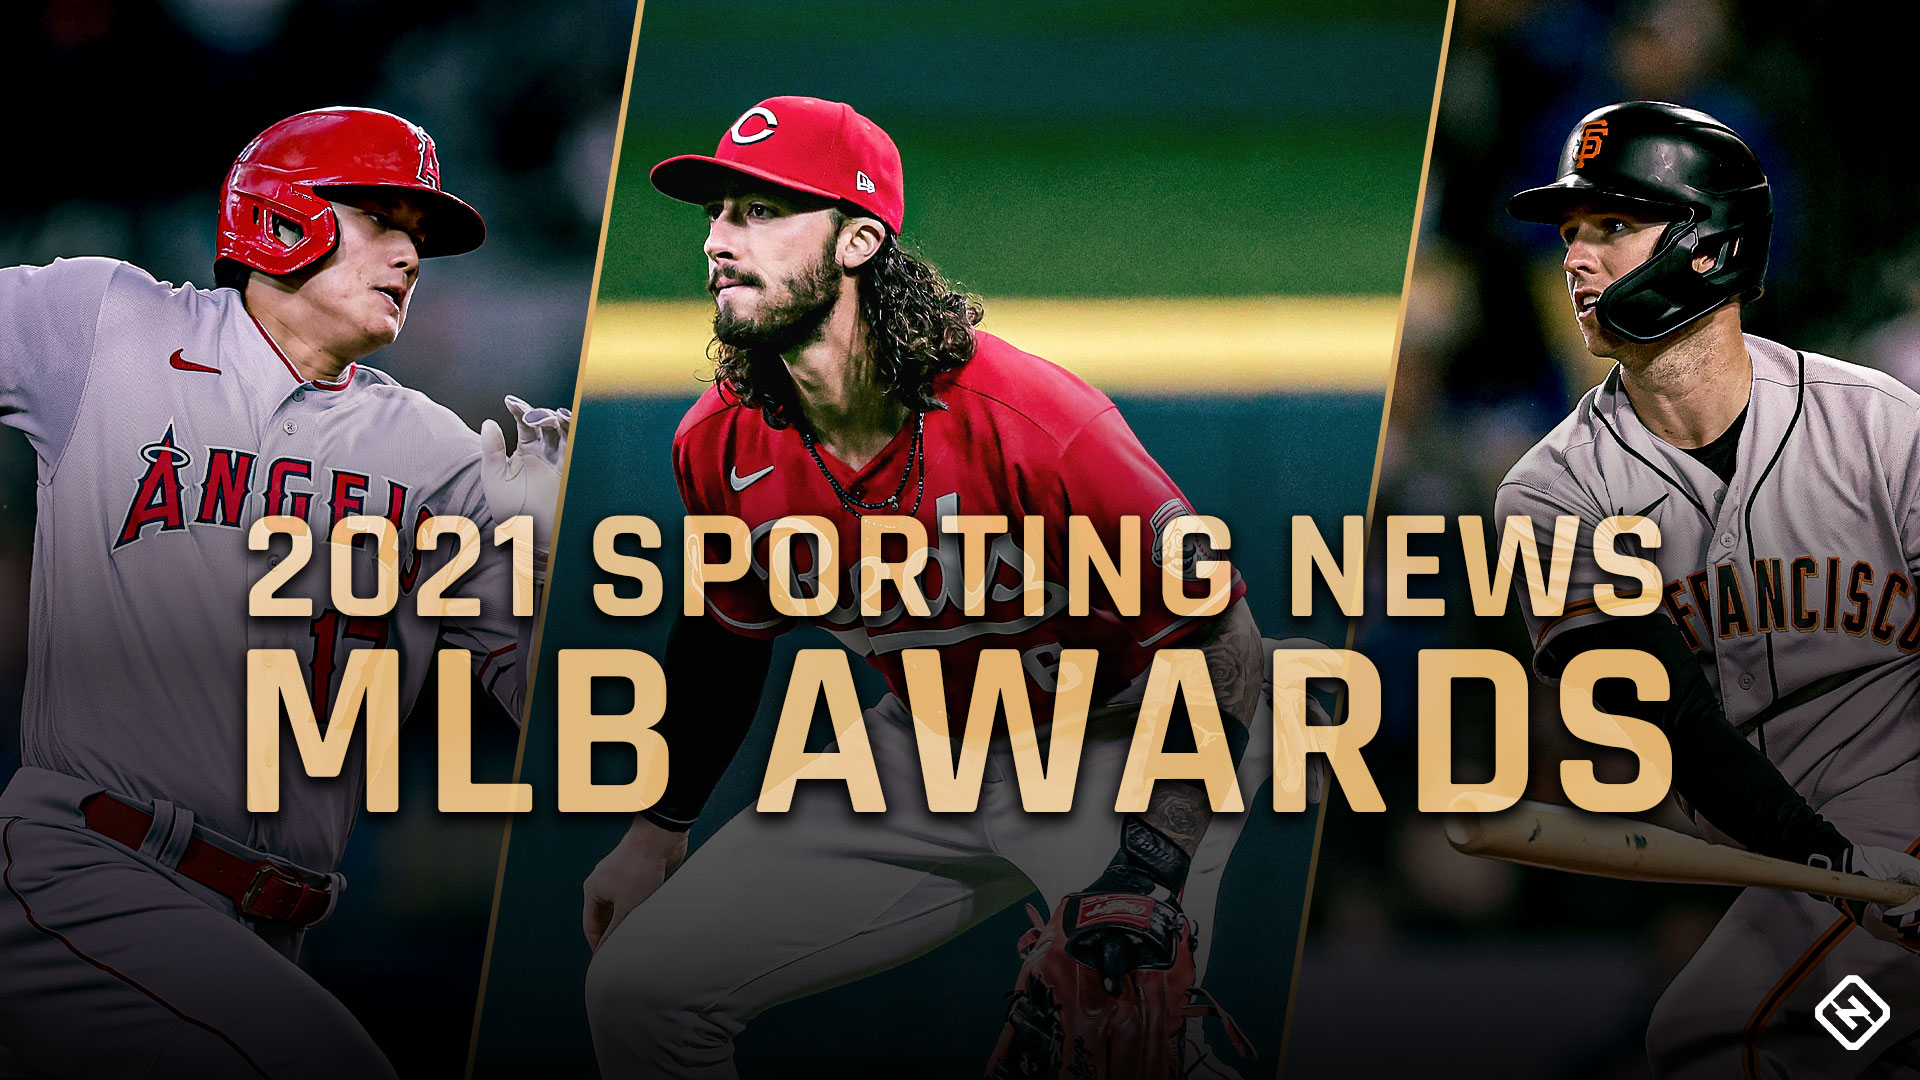 Sporting News 2021 MLB awards: Ohtani voted top player; Posey leads Giants in strong showing